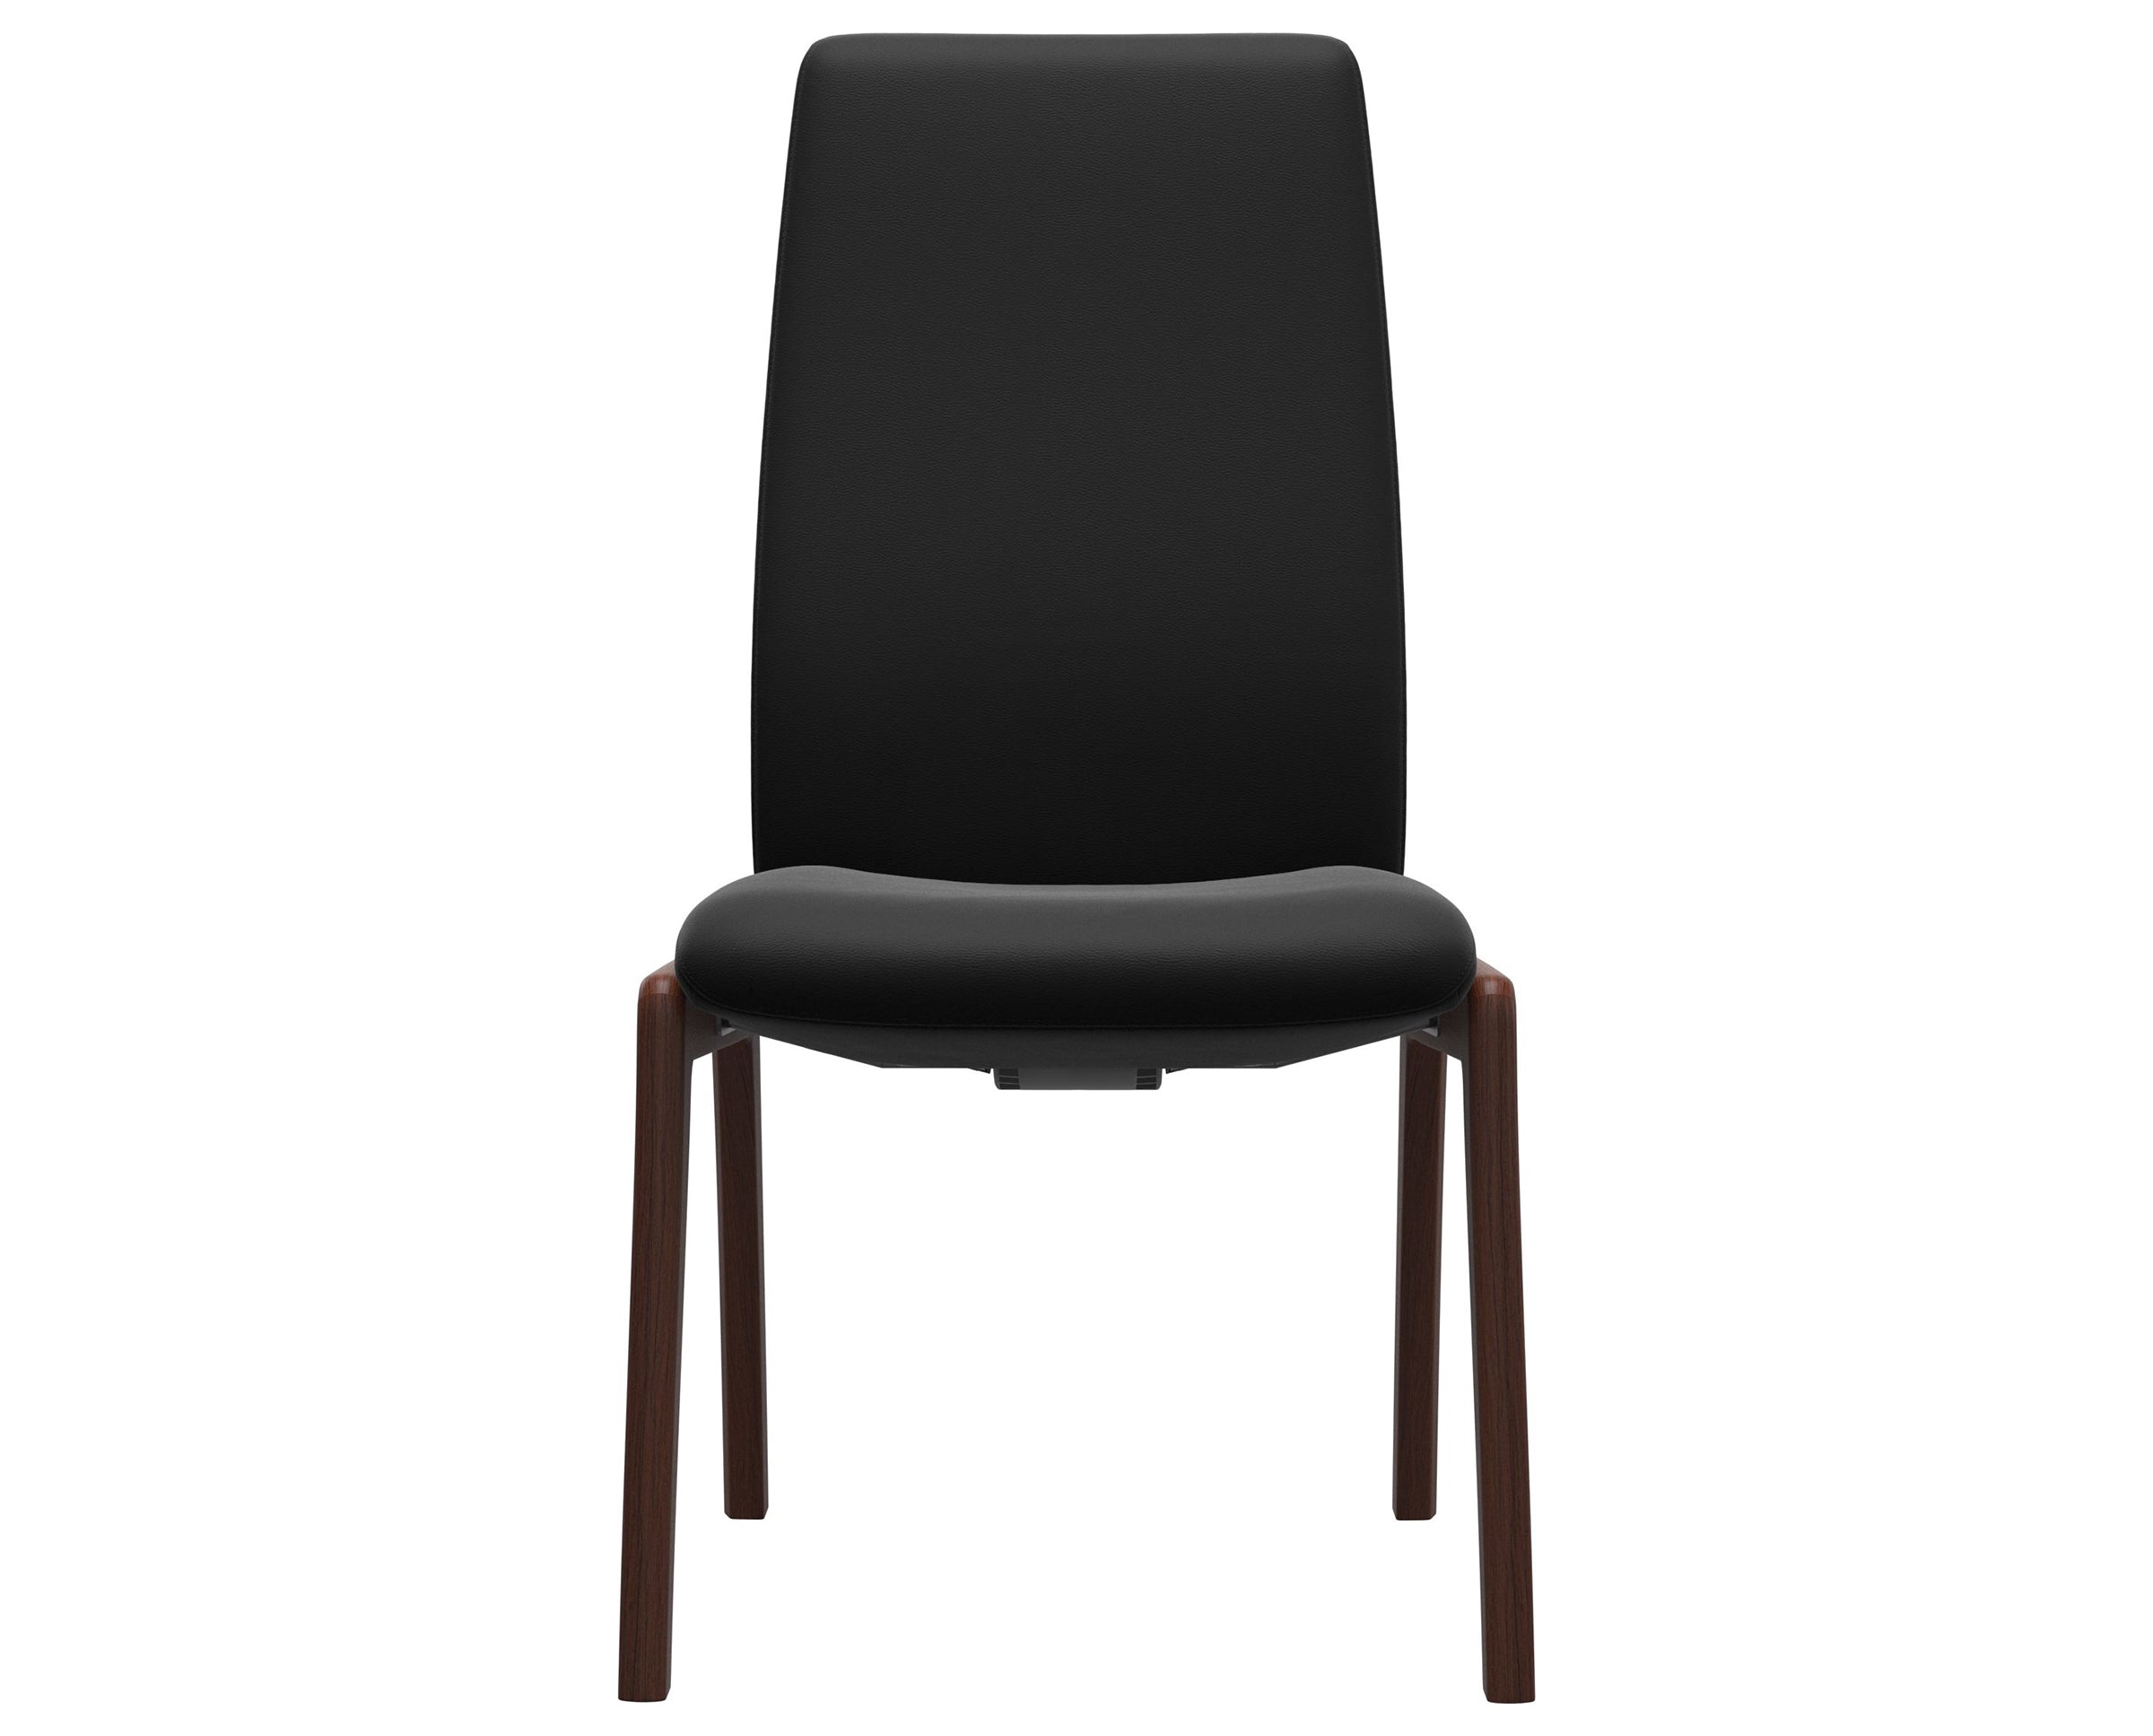 Paloma Leather Black and Walnut Base | Stressless Laurel High Back D100 Dining Chair | Valley Ridge Furniture